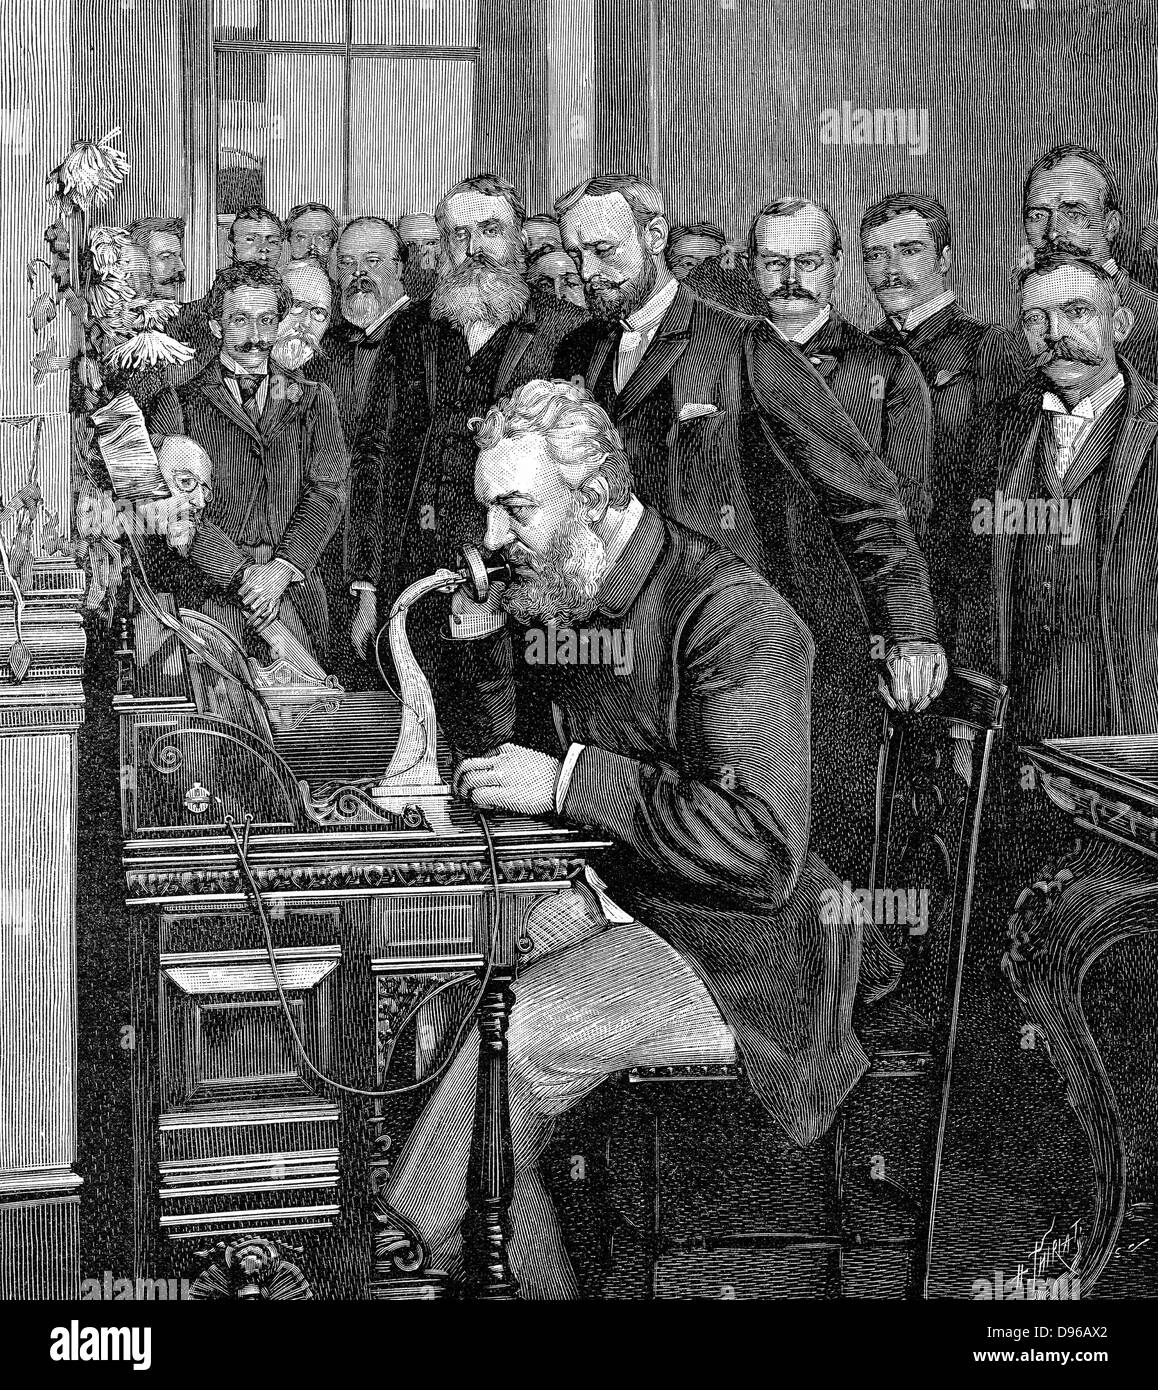 Alexander Graham Bell (1847-1922) Scottish-born American inventor; patented telephone 1876; Bell inaugurating 1520 km telephone link between New York and Chicago, 18 October 1892. Engraving published Paris 1892 Stock Photo